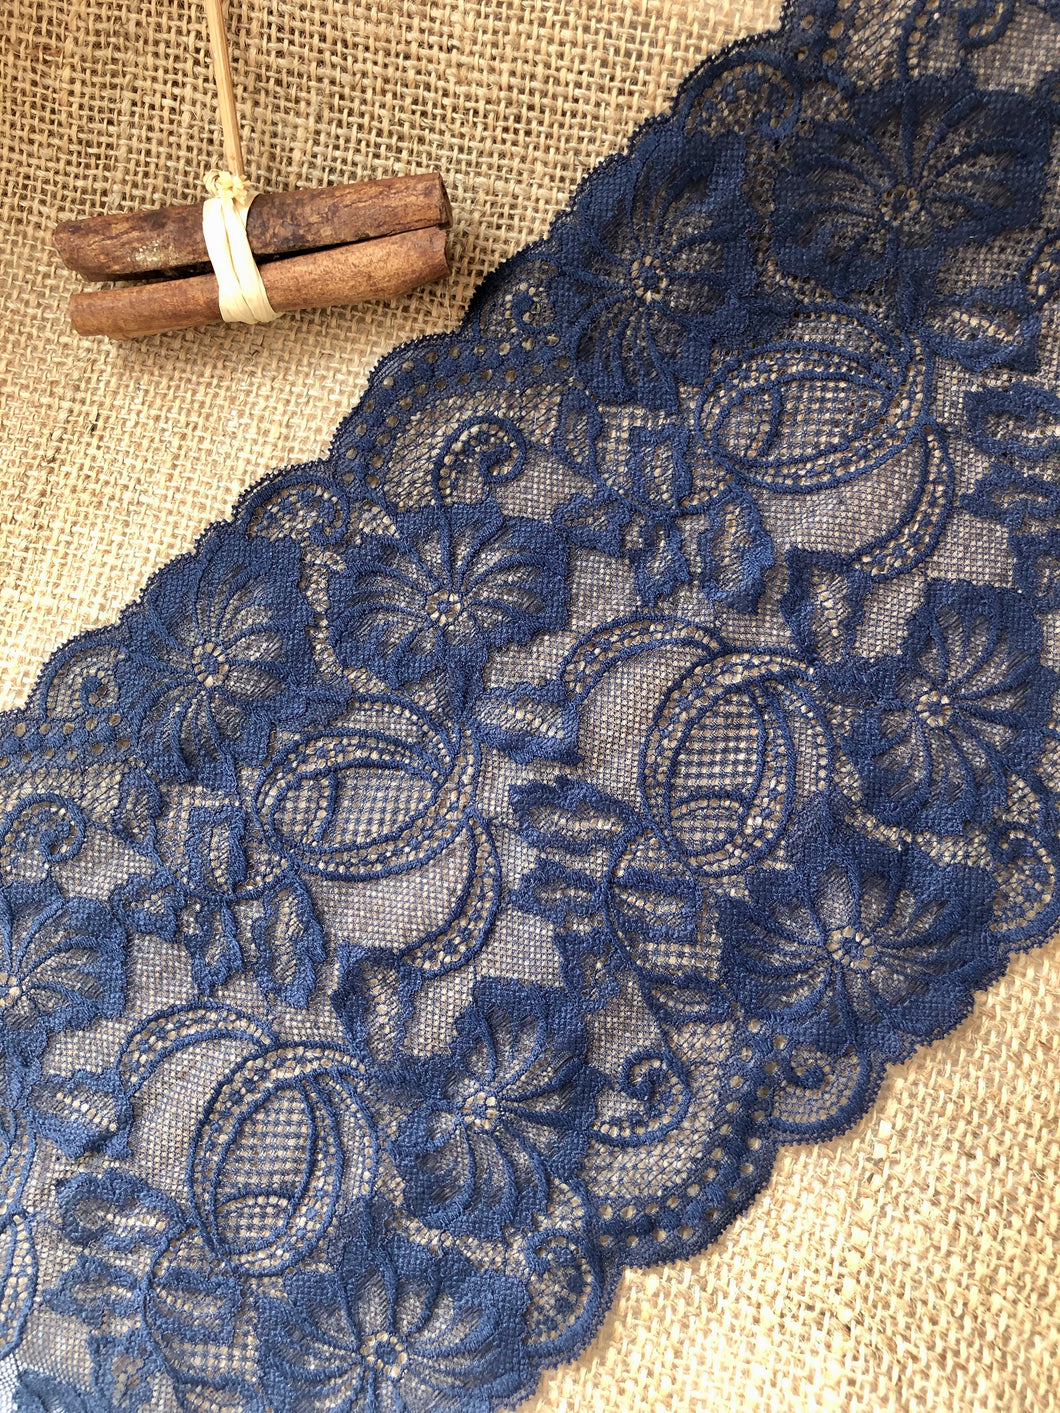 Soft Navy Blue Stretch Lace Wide 18cm/7 Lingerie Craft Sew www